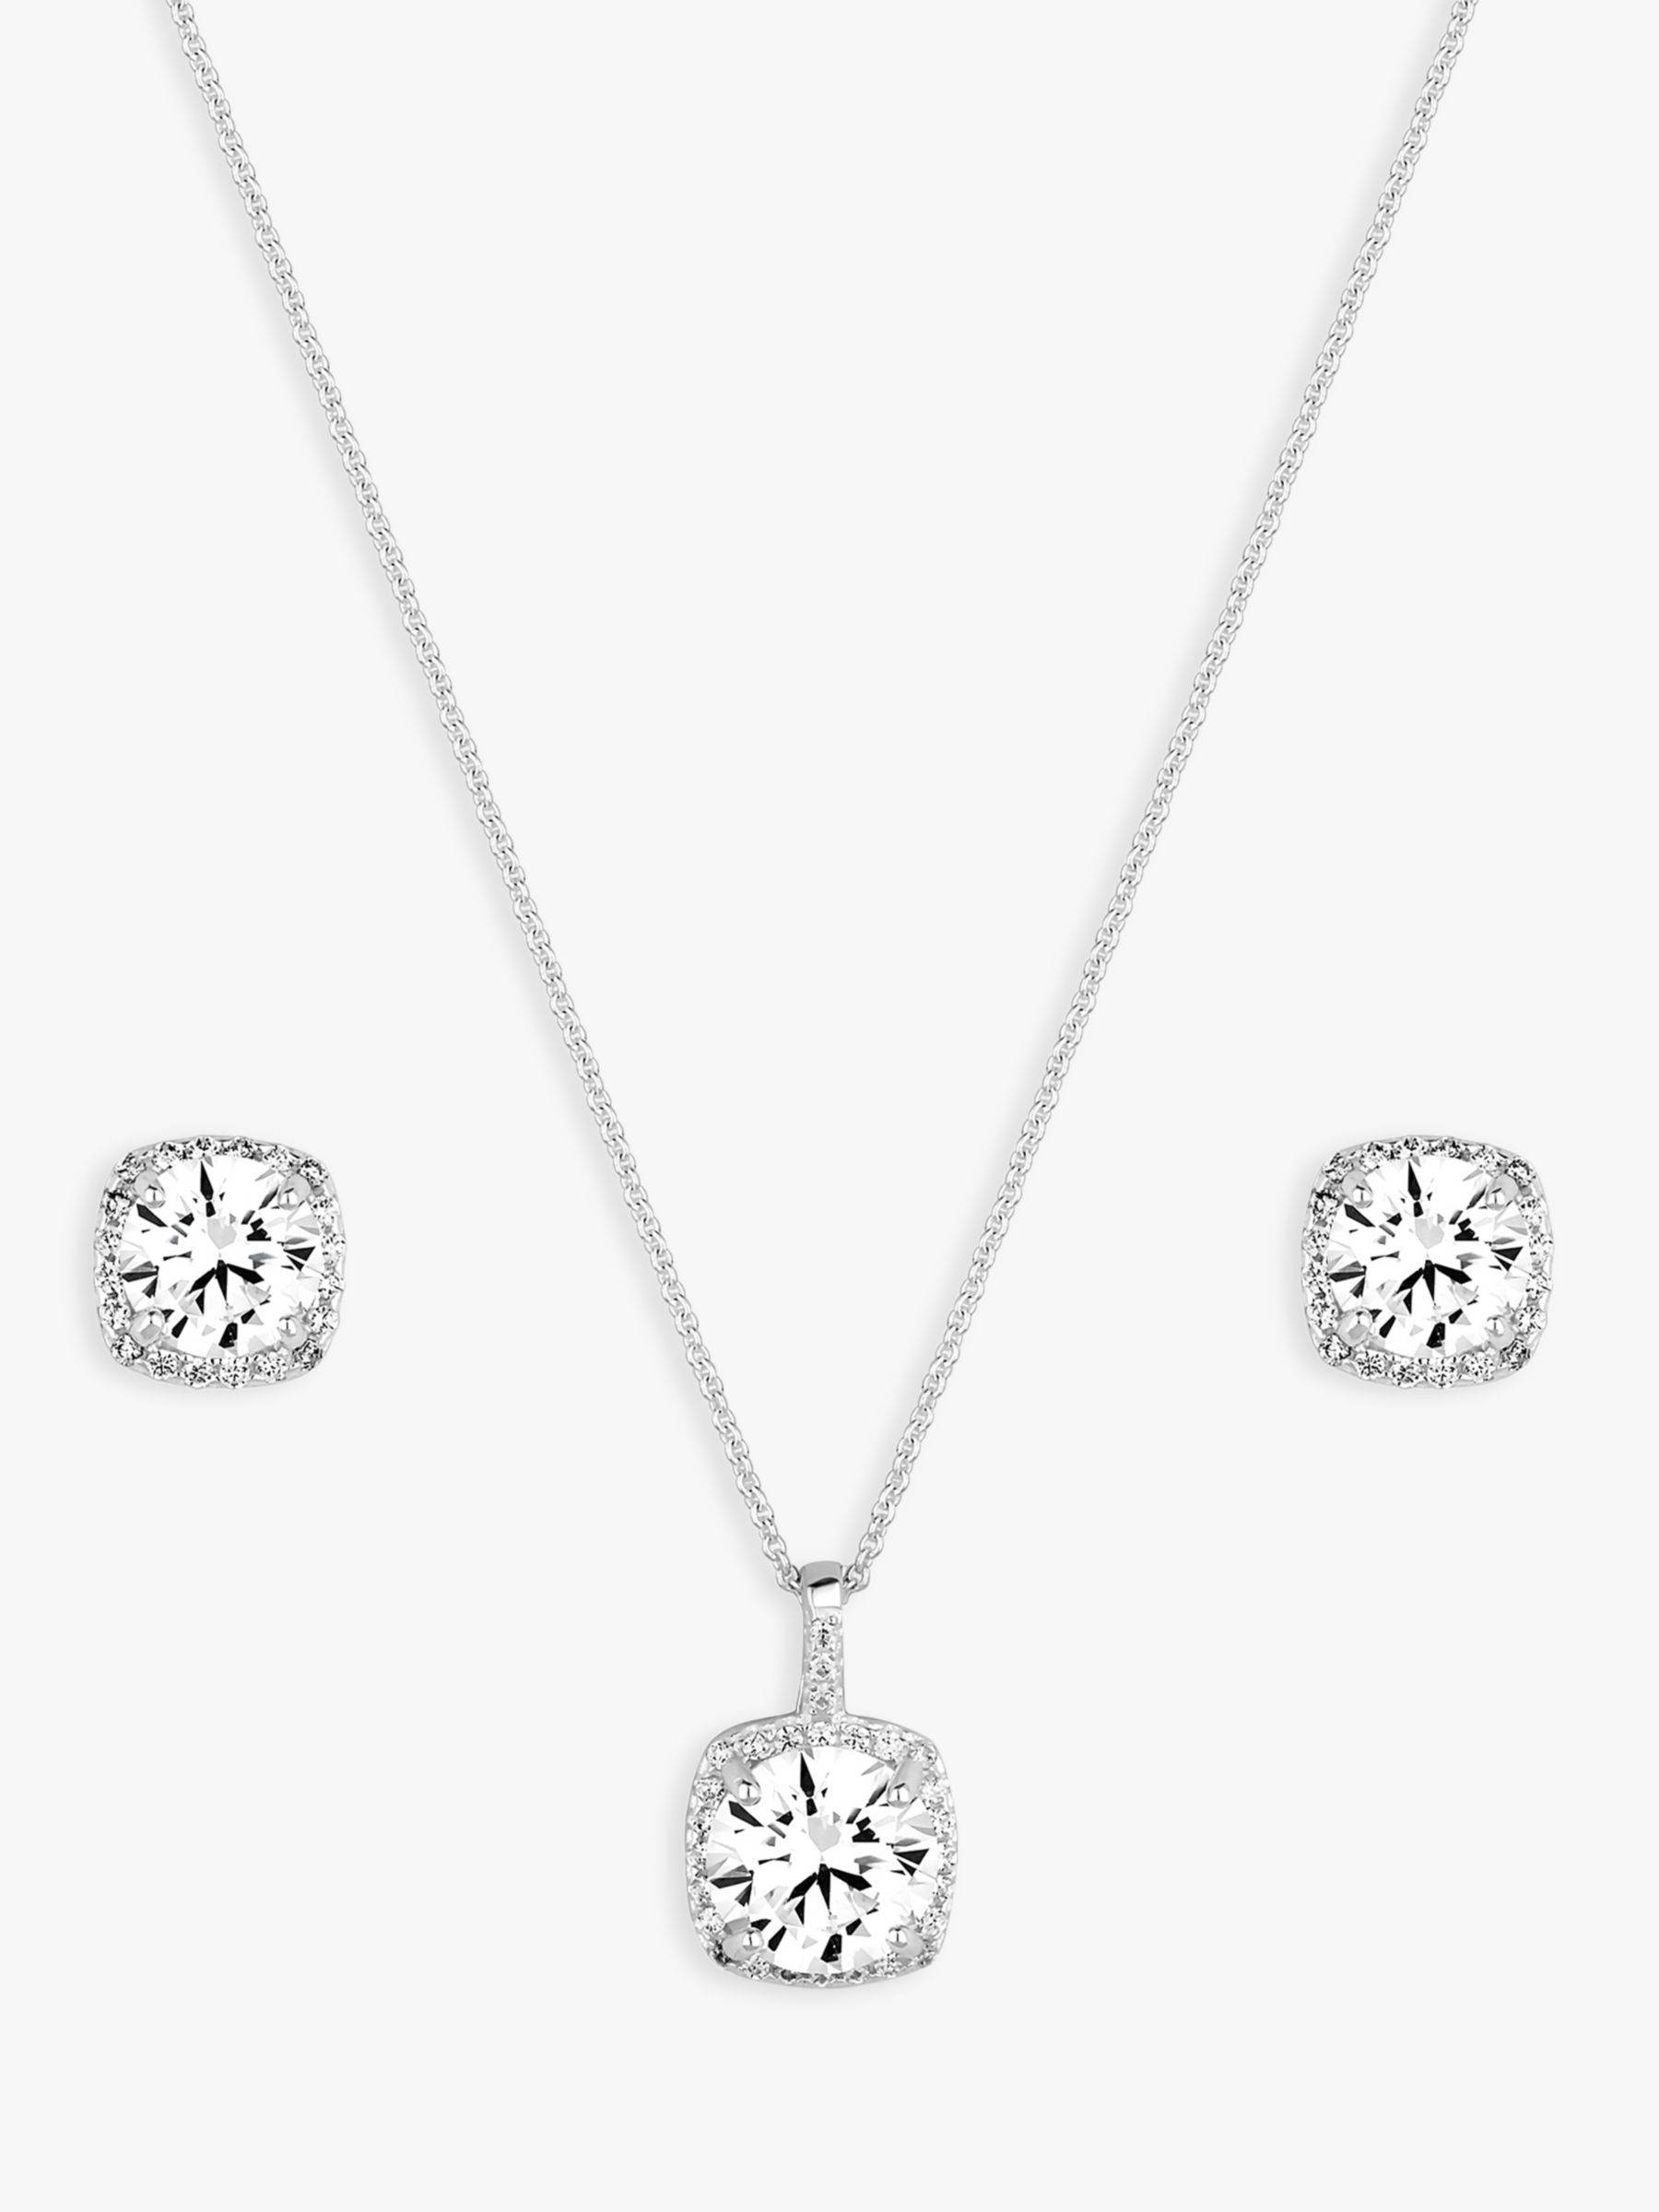 Buy Simply Silver Halo Square Cubic Zirconia Pendant Necklace & Stud Earrings Jewellery Set, Silver Online at johnlewis.com